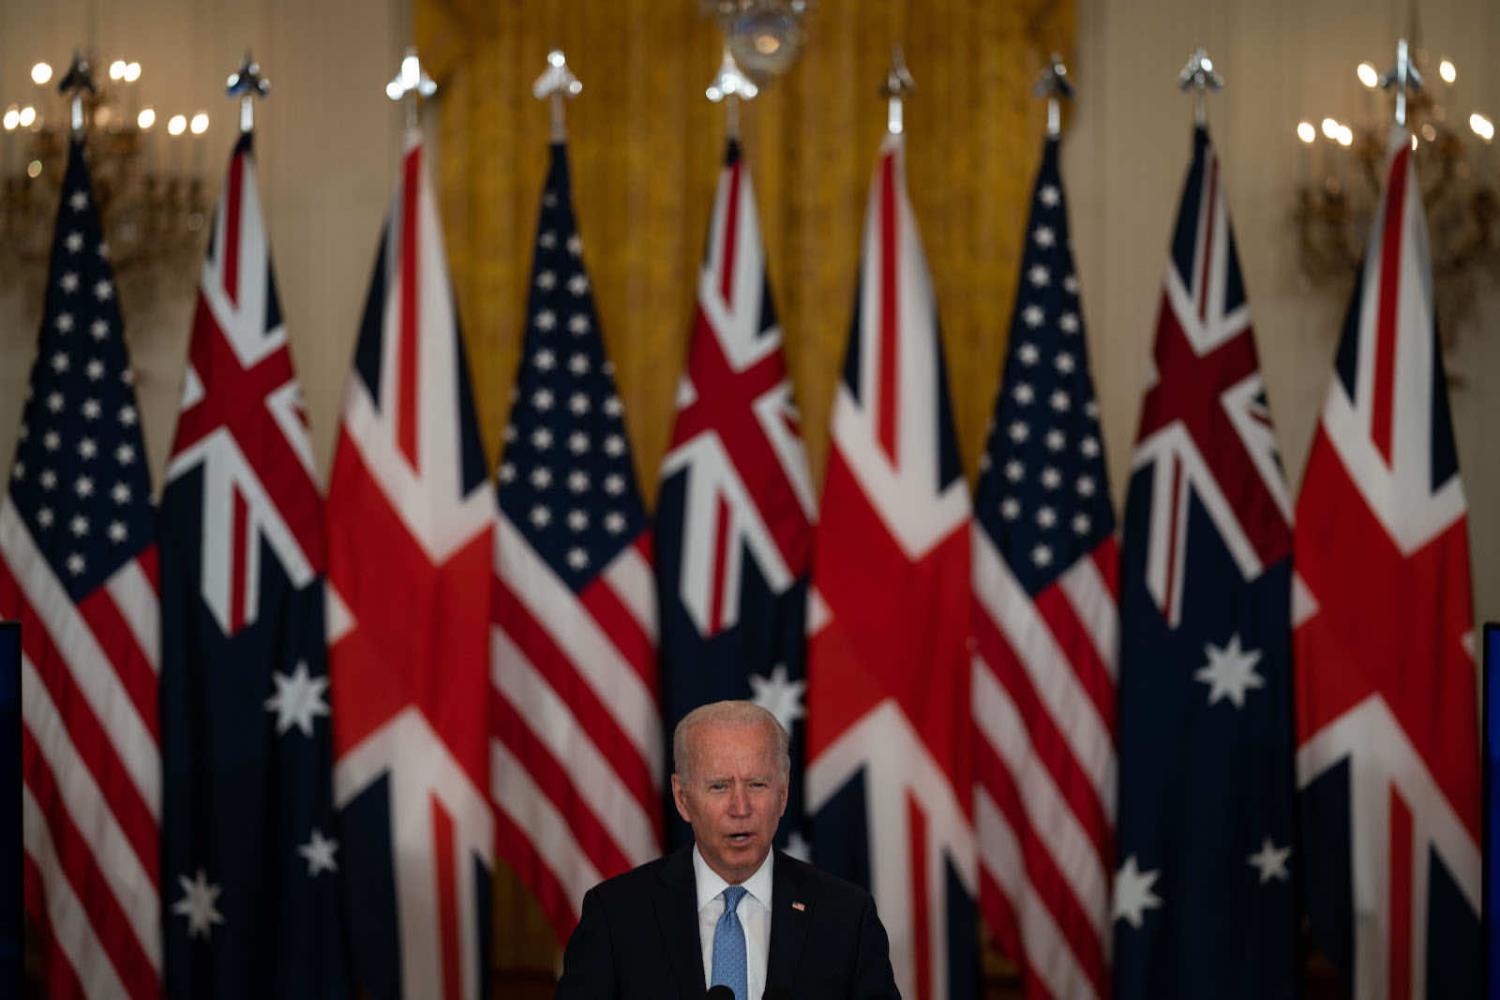 US President Joe Biden announcing that the United Staters along with the United Kingdom will share nuclear submarine technology with Australia under an arrangement dubbed AUKUS (Kent Nishimura/Los Angeles Times via Getty Images)